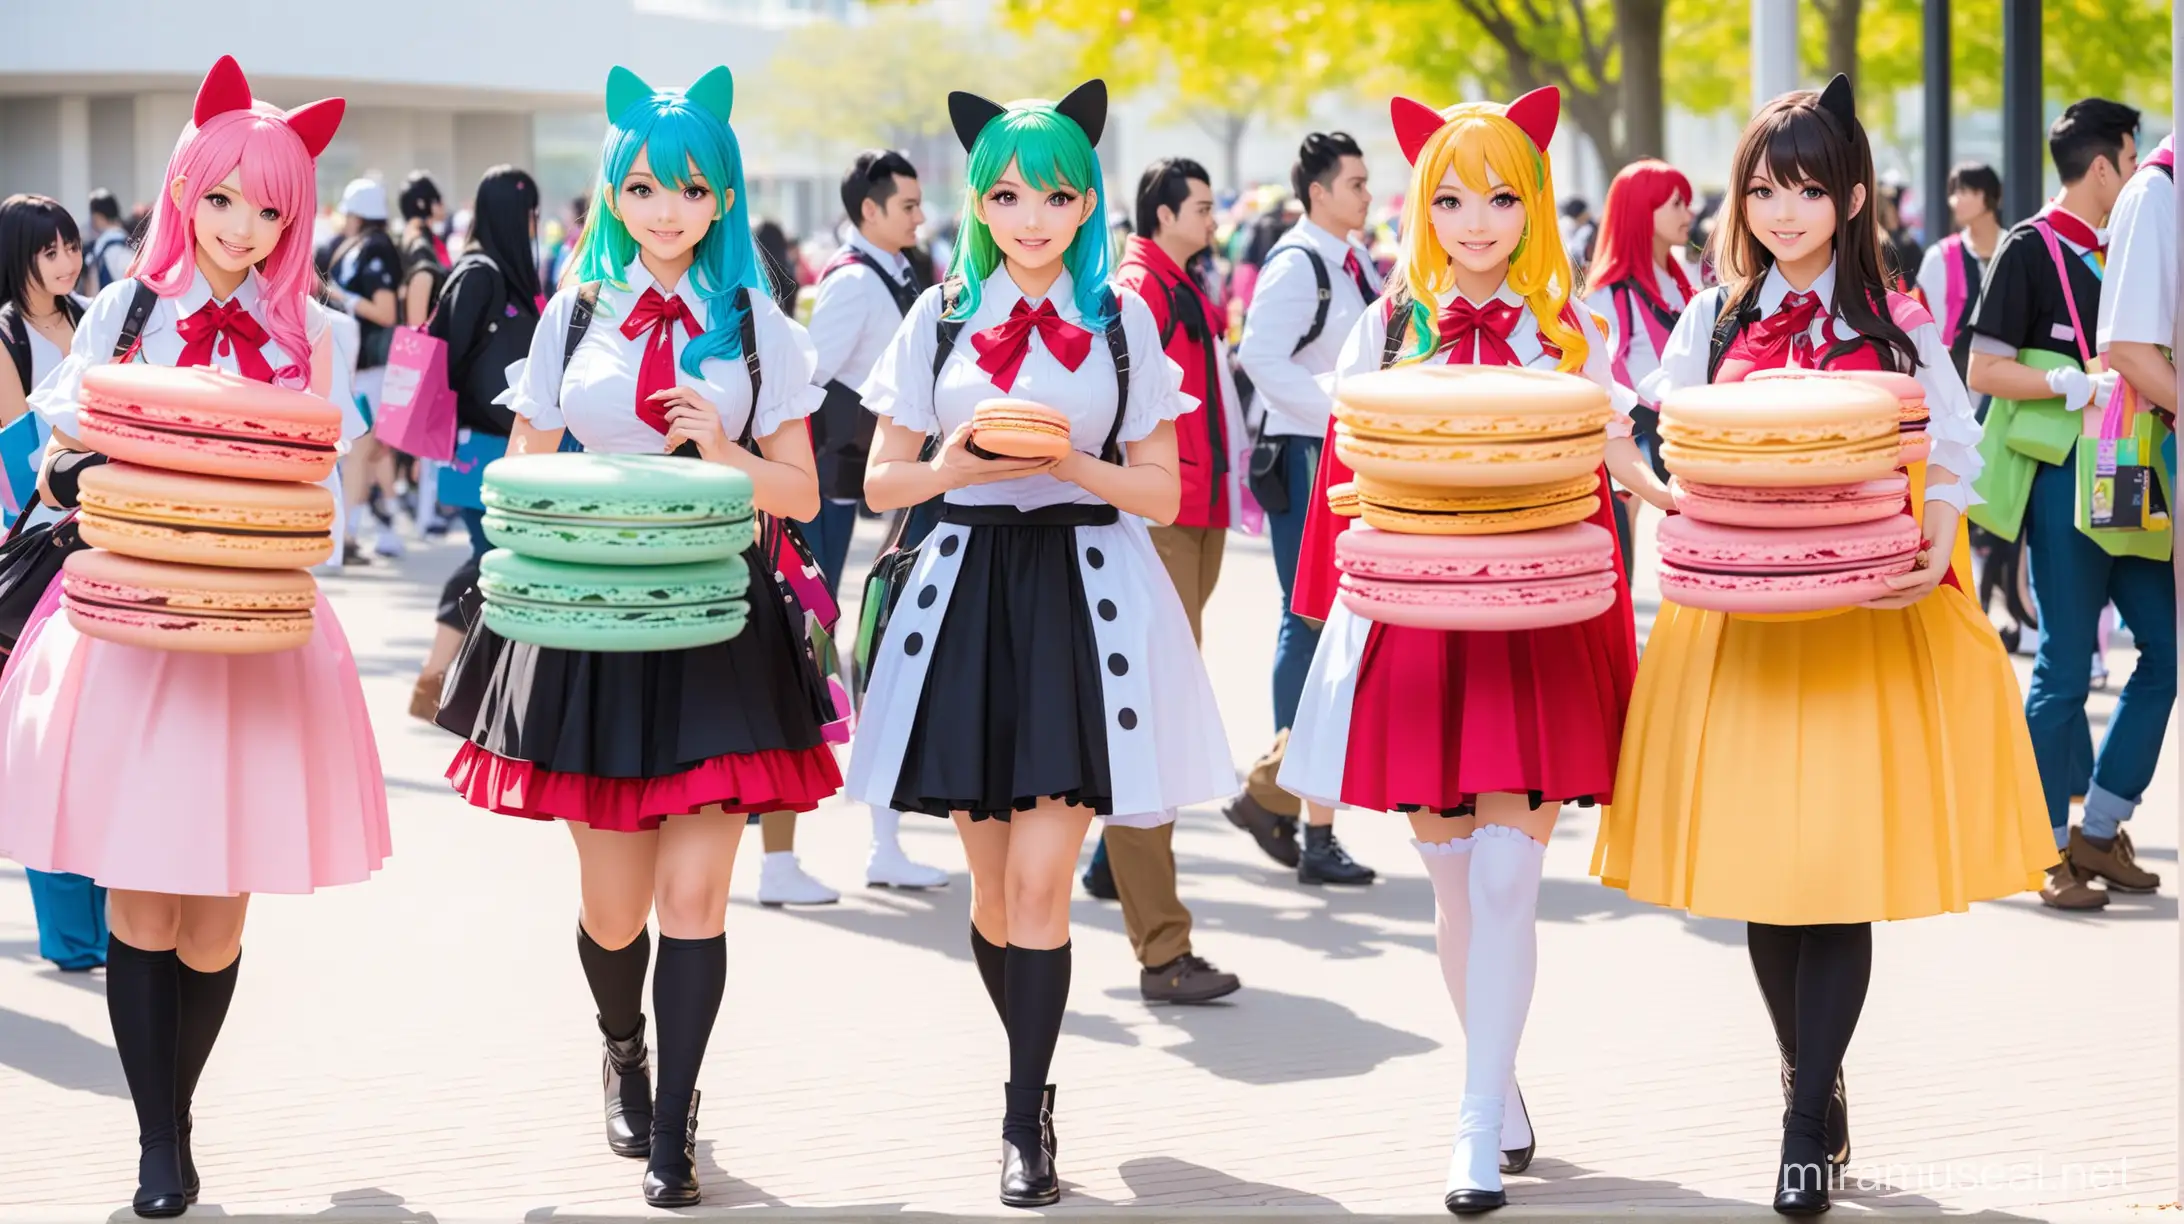 cosplayers at an anime convention walking around with cute boxes of colorful macarons